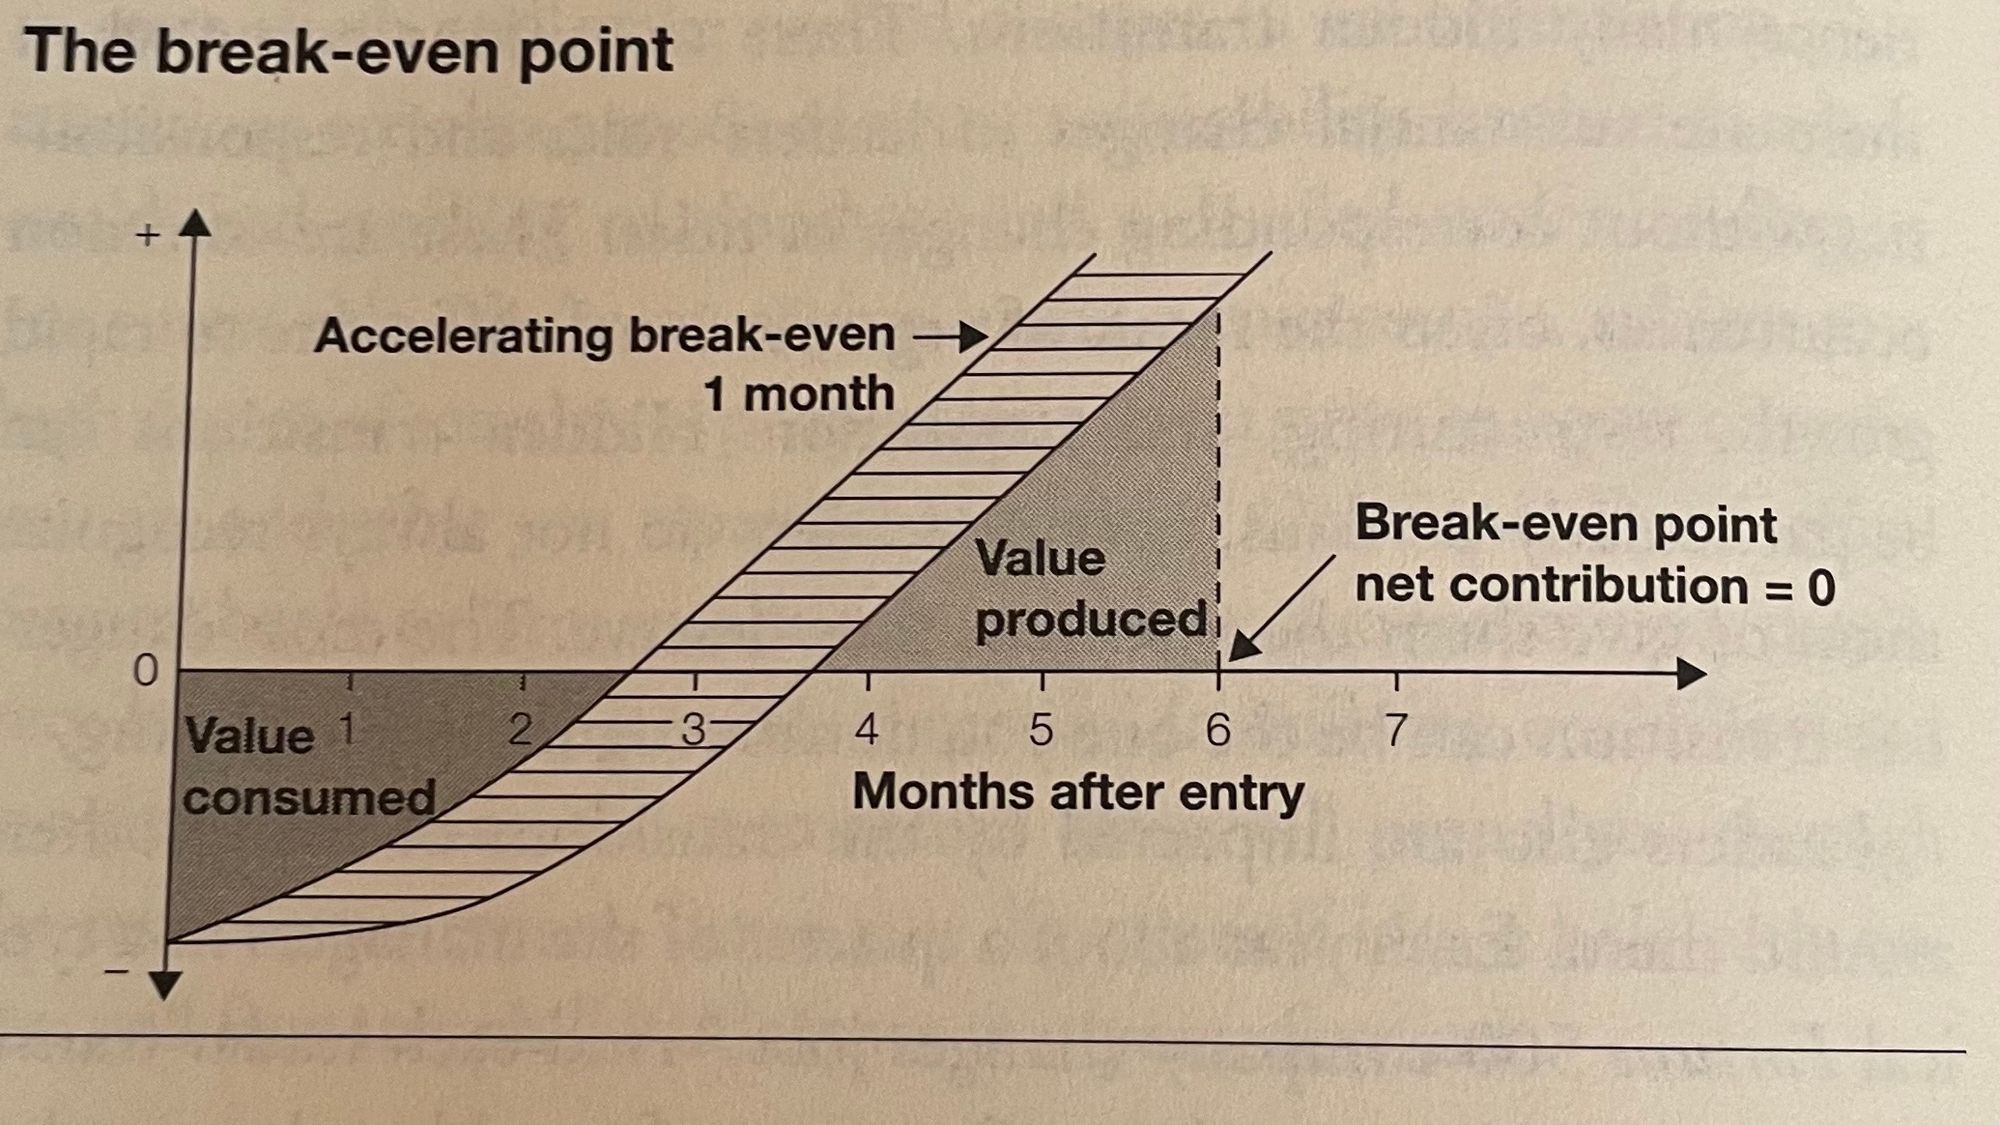 Visual representation of the break-even point. Watkins, "The first 90 days", pg. 4